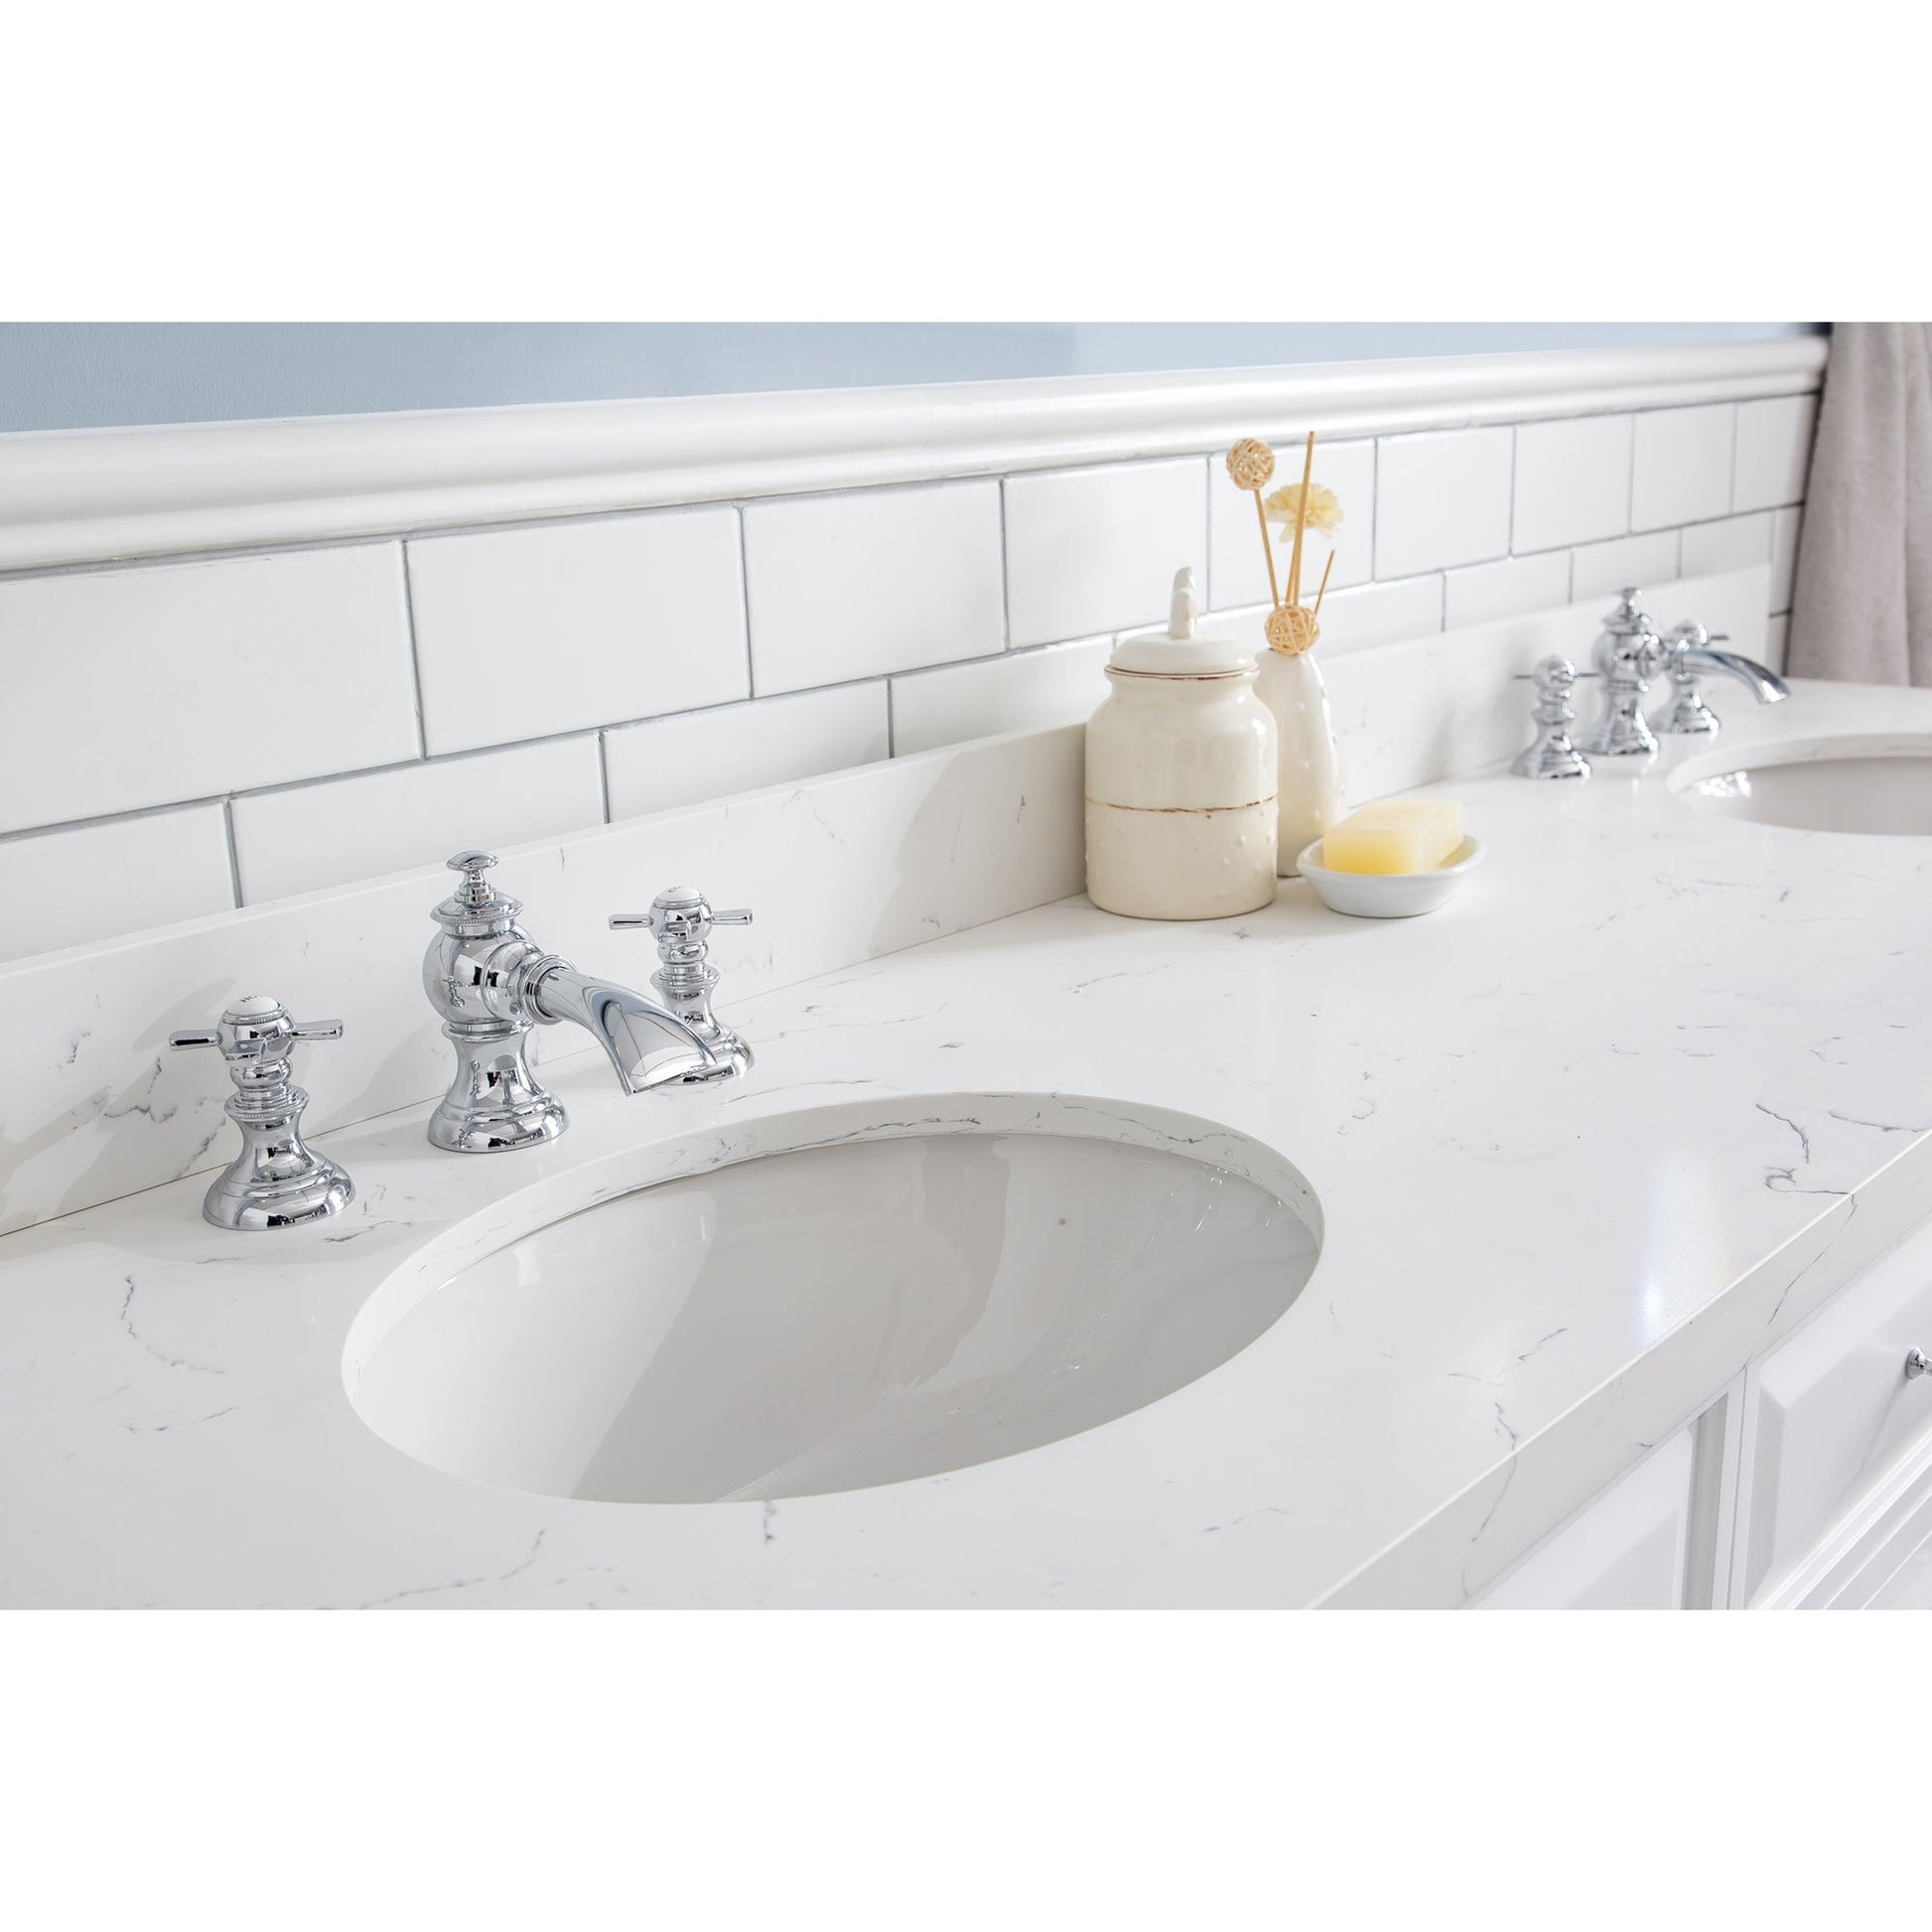 Water Creation Palace 72" Quartz Carrara Pure White Bathroom Vanity Set With Hardware And F2-0013 Faucets, Mirror in Chrome Finish